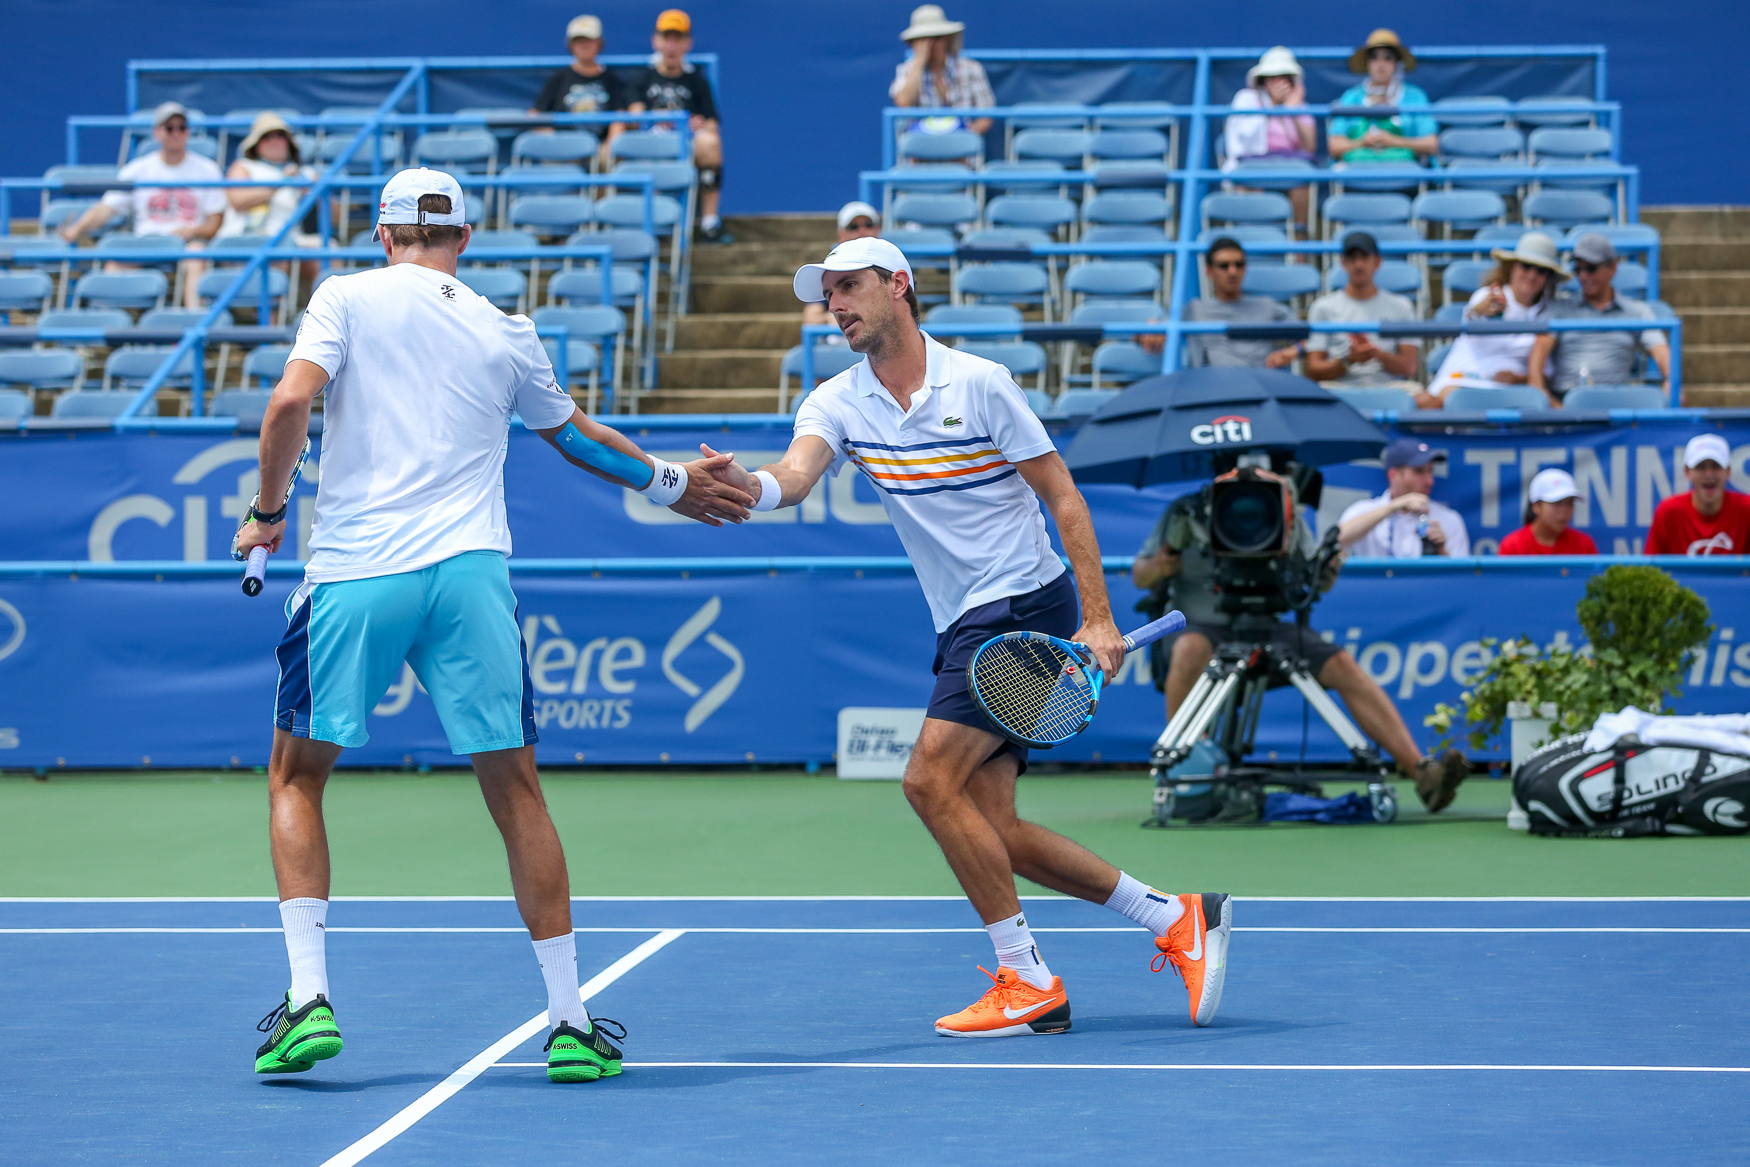 Citi Open brings the best of tennis to D.C. DC Refined